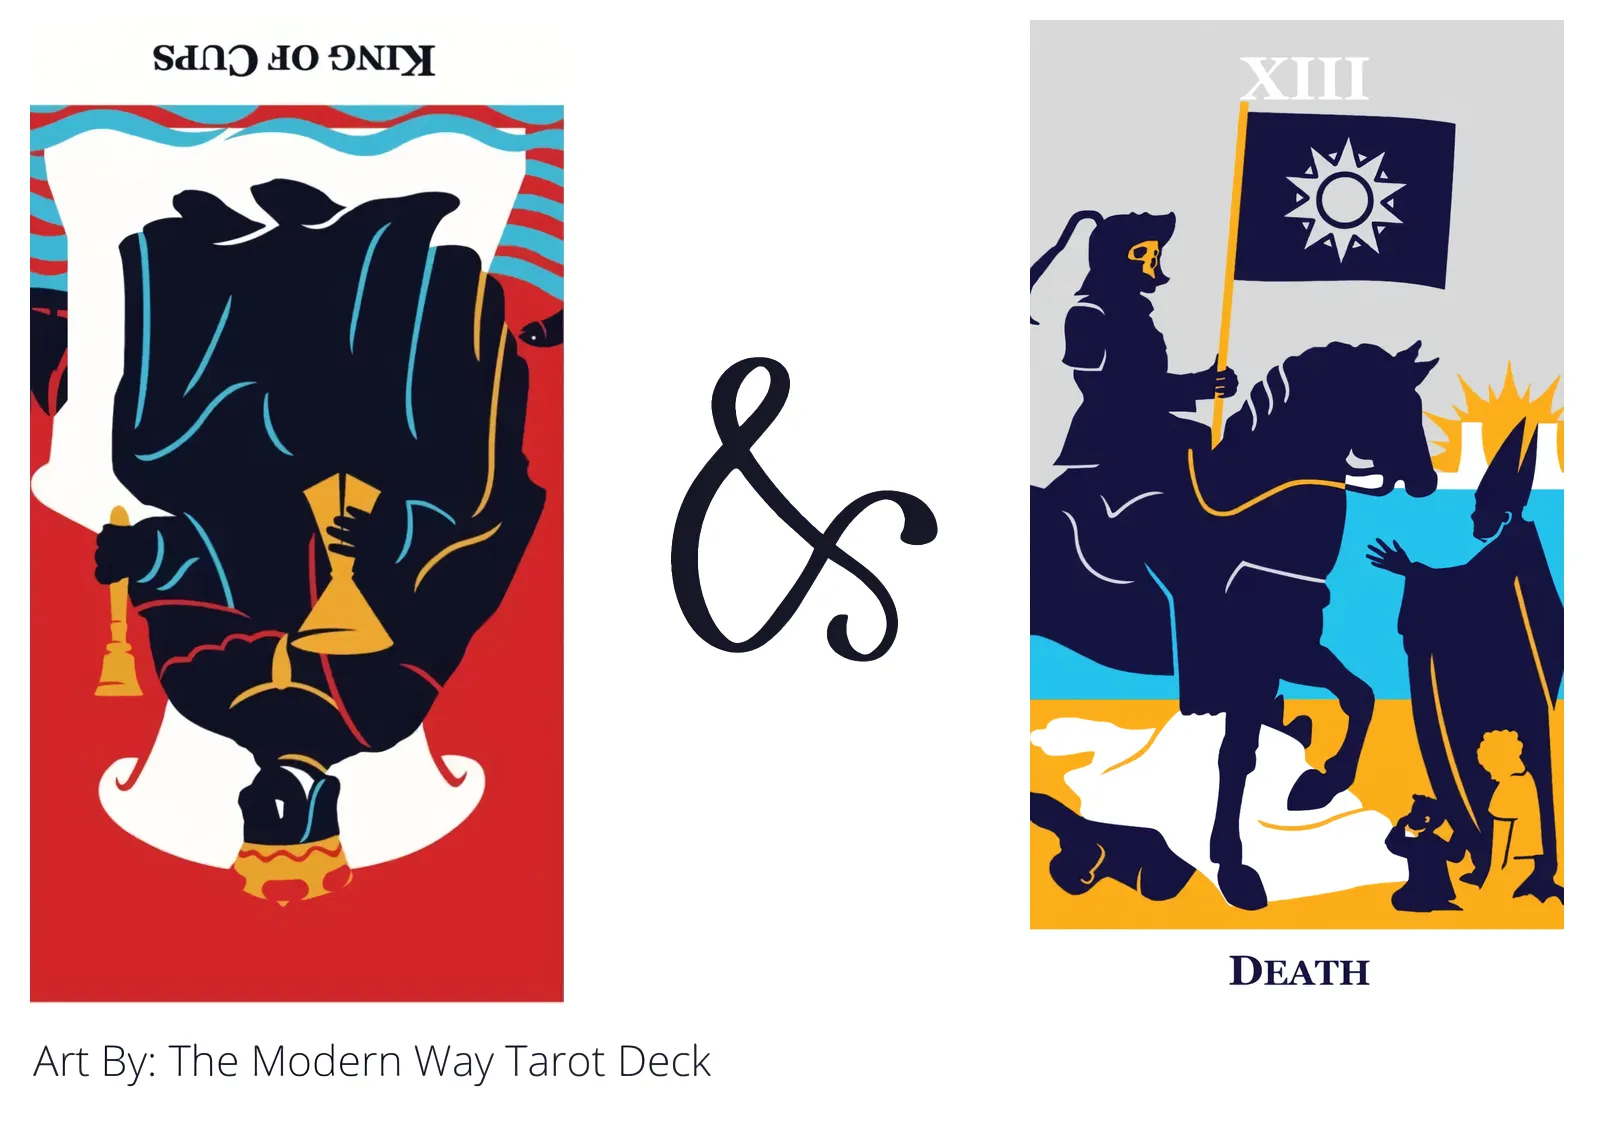 king of cups reversed and death tarot cards together